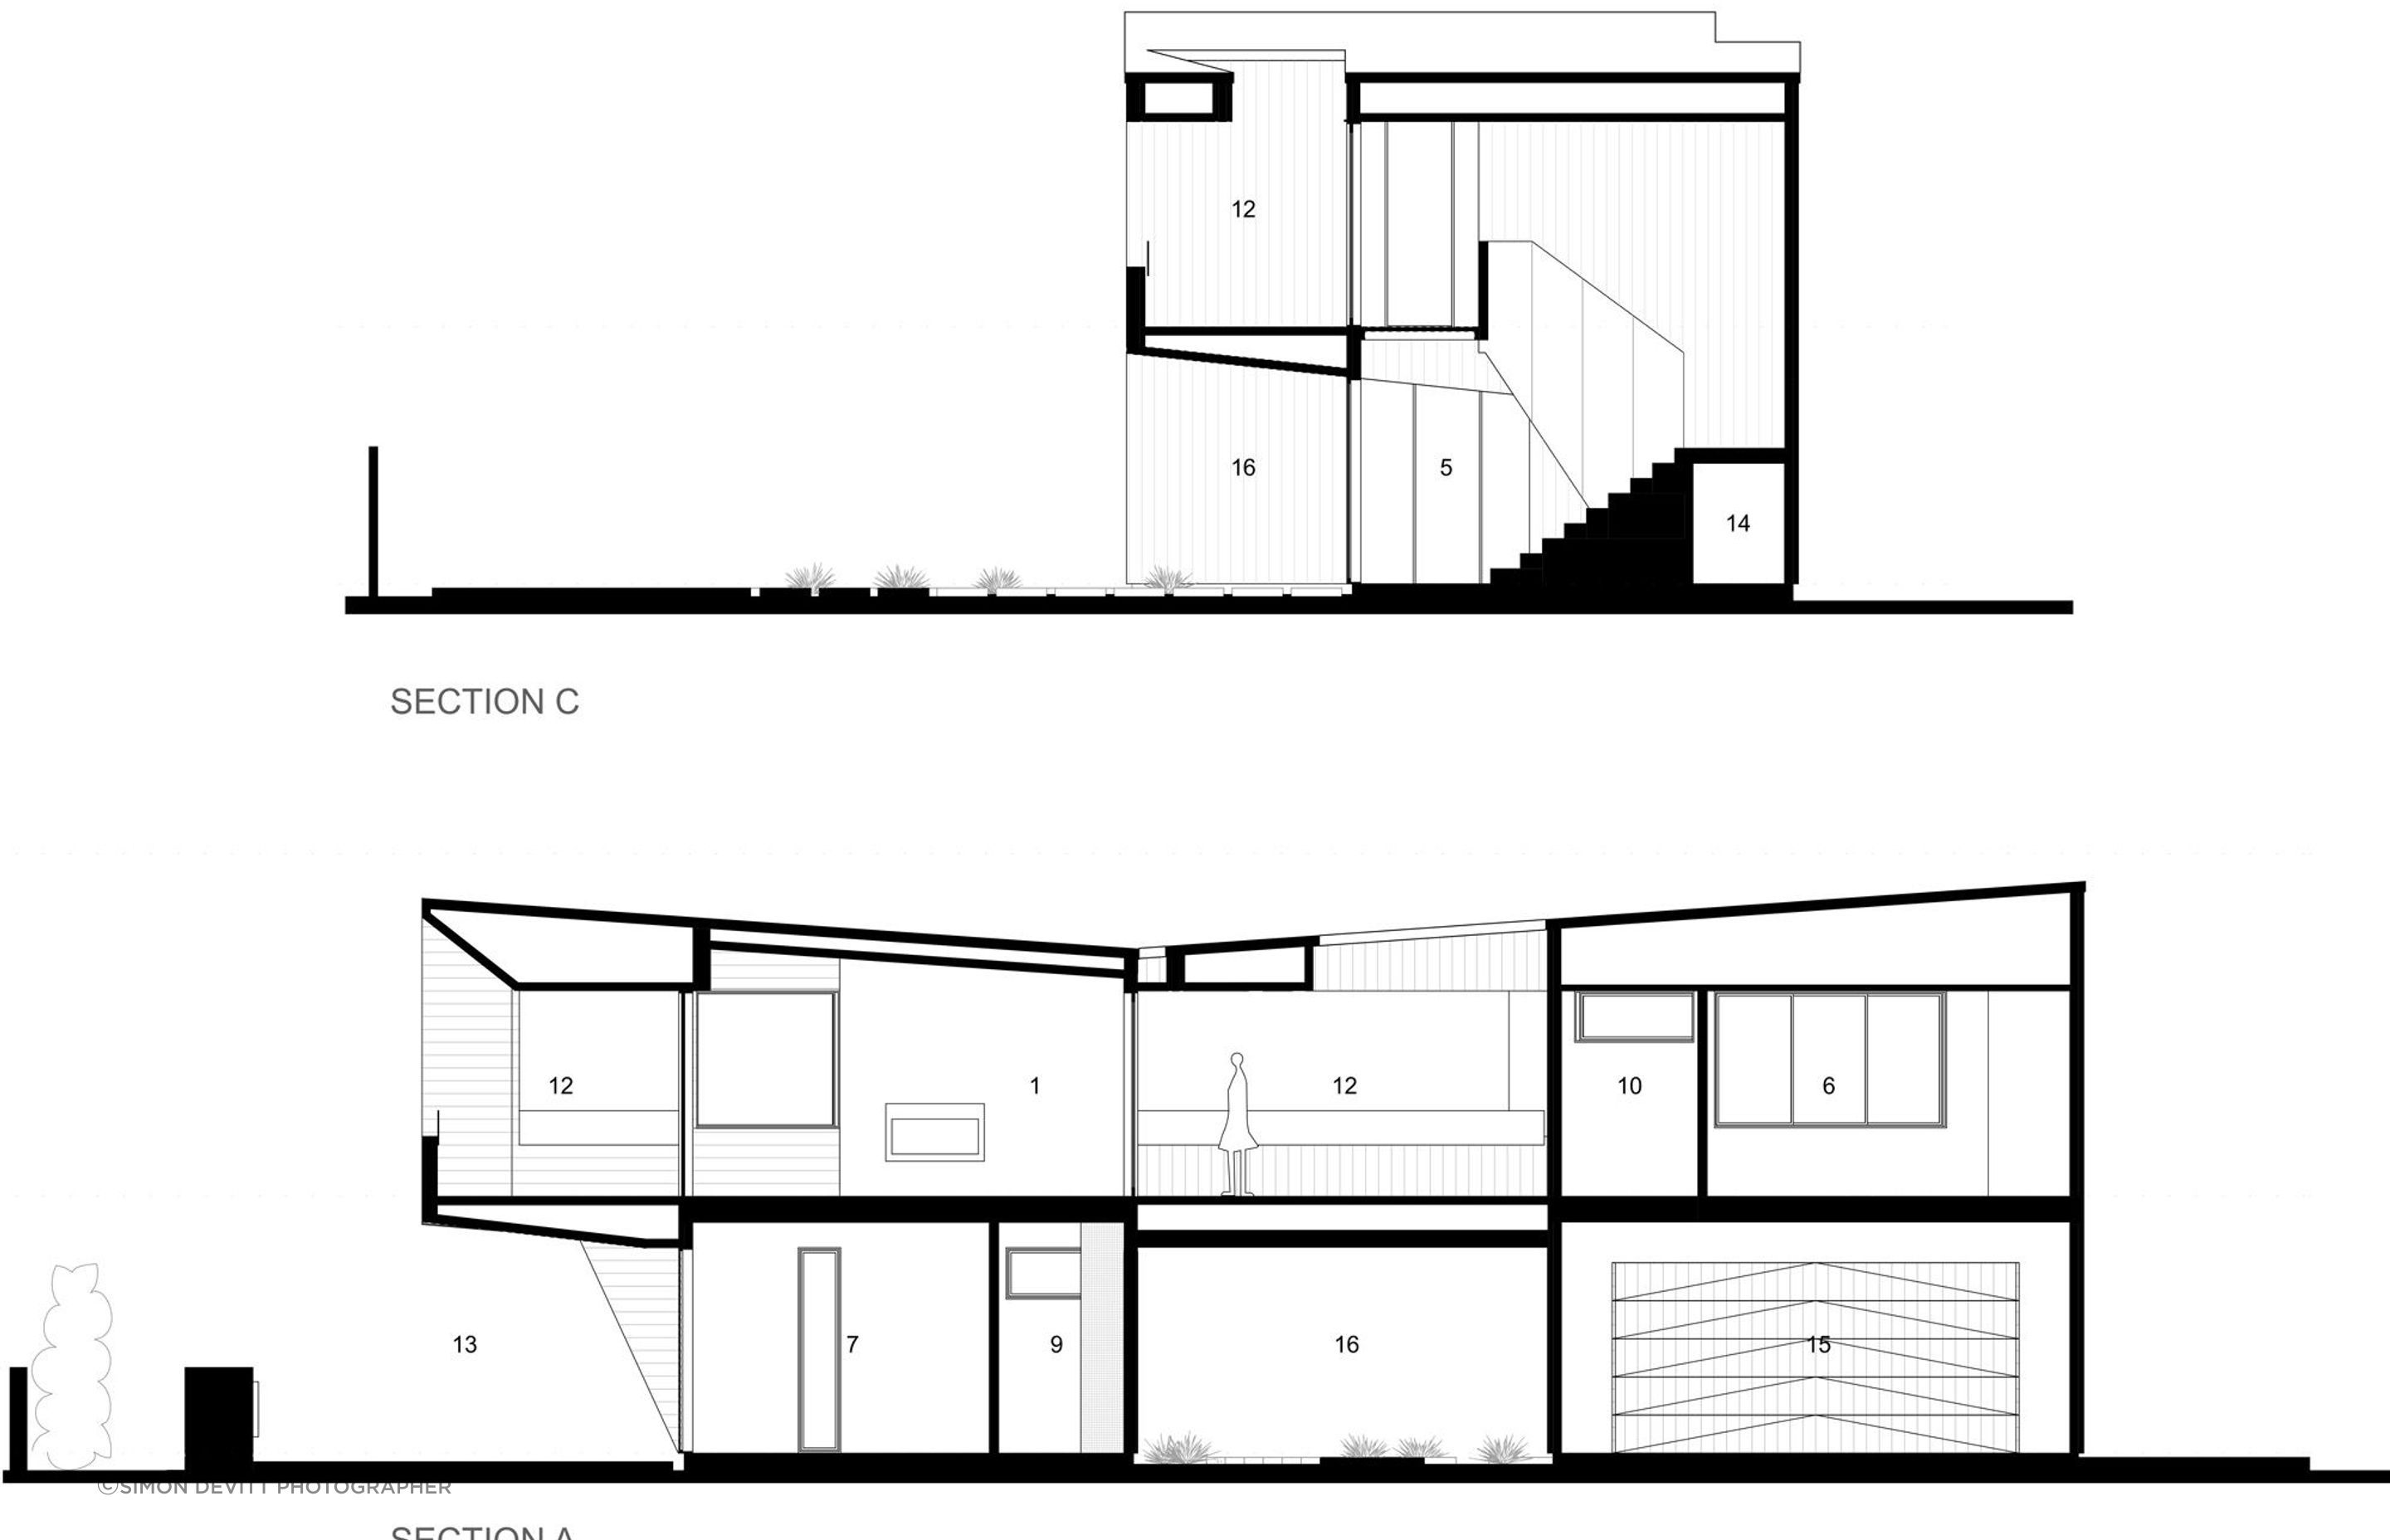 Cross sections of Te Whare Rakau by Julian Guthrie Architecture.. The numbering of the spaces relates to the numbering on the floor plans seen above.